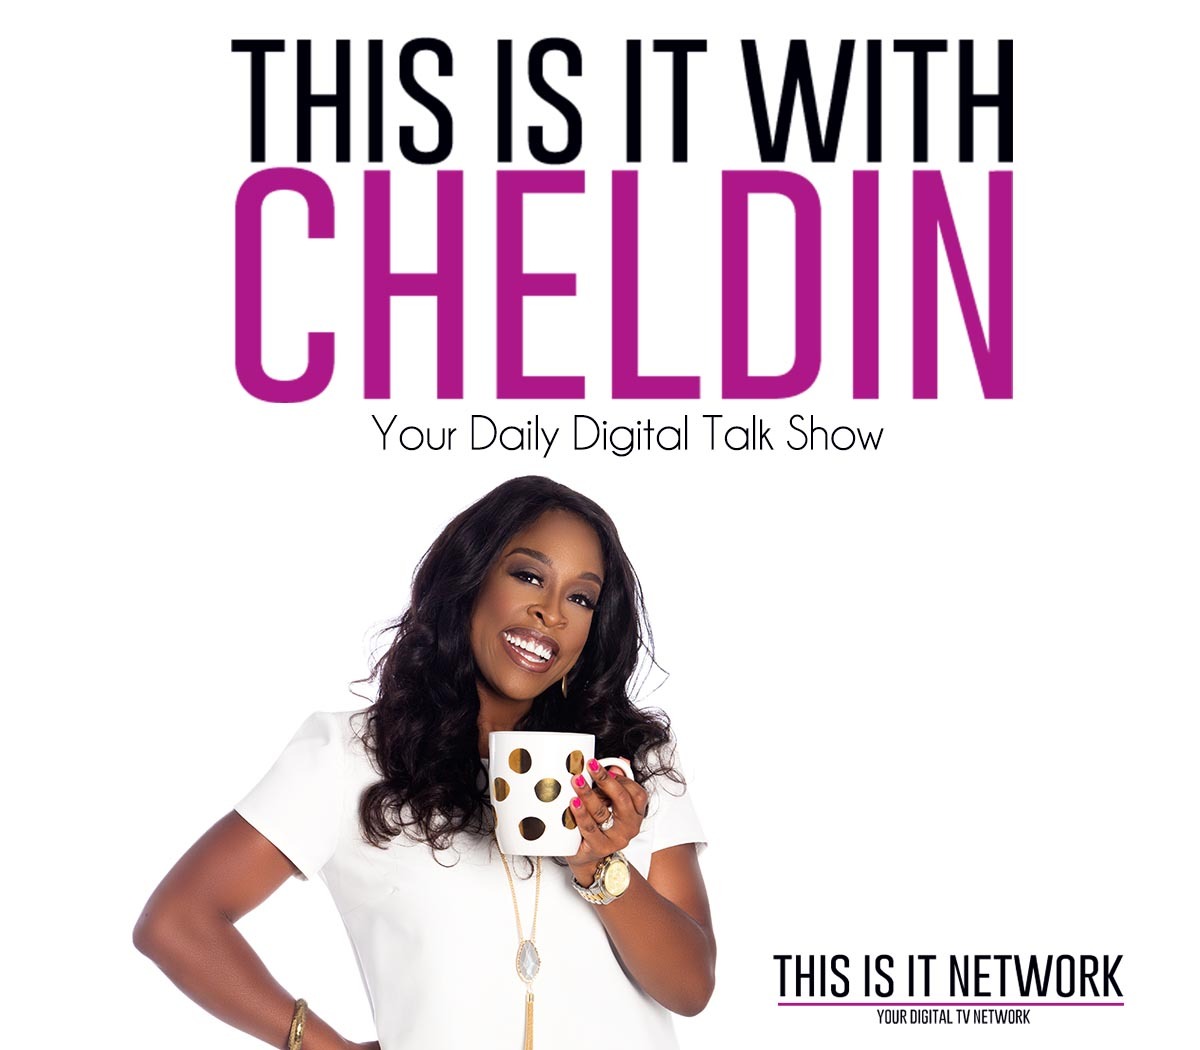 IG LIVE | The Importance of Practicing Motivation with Cheldin Barlatt, CEO/Host of This Is It TV Network